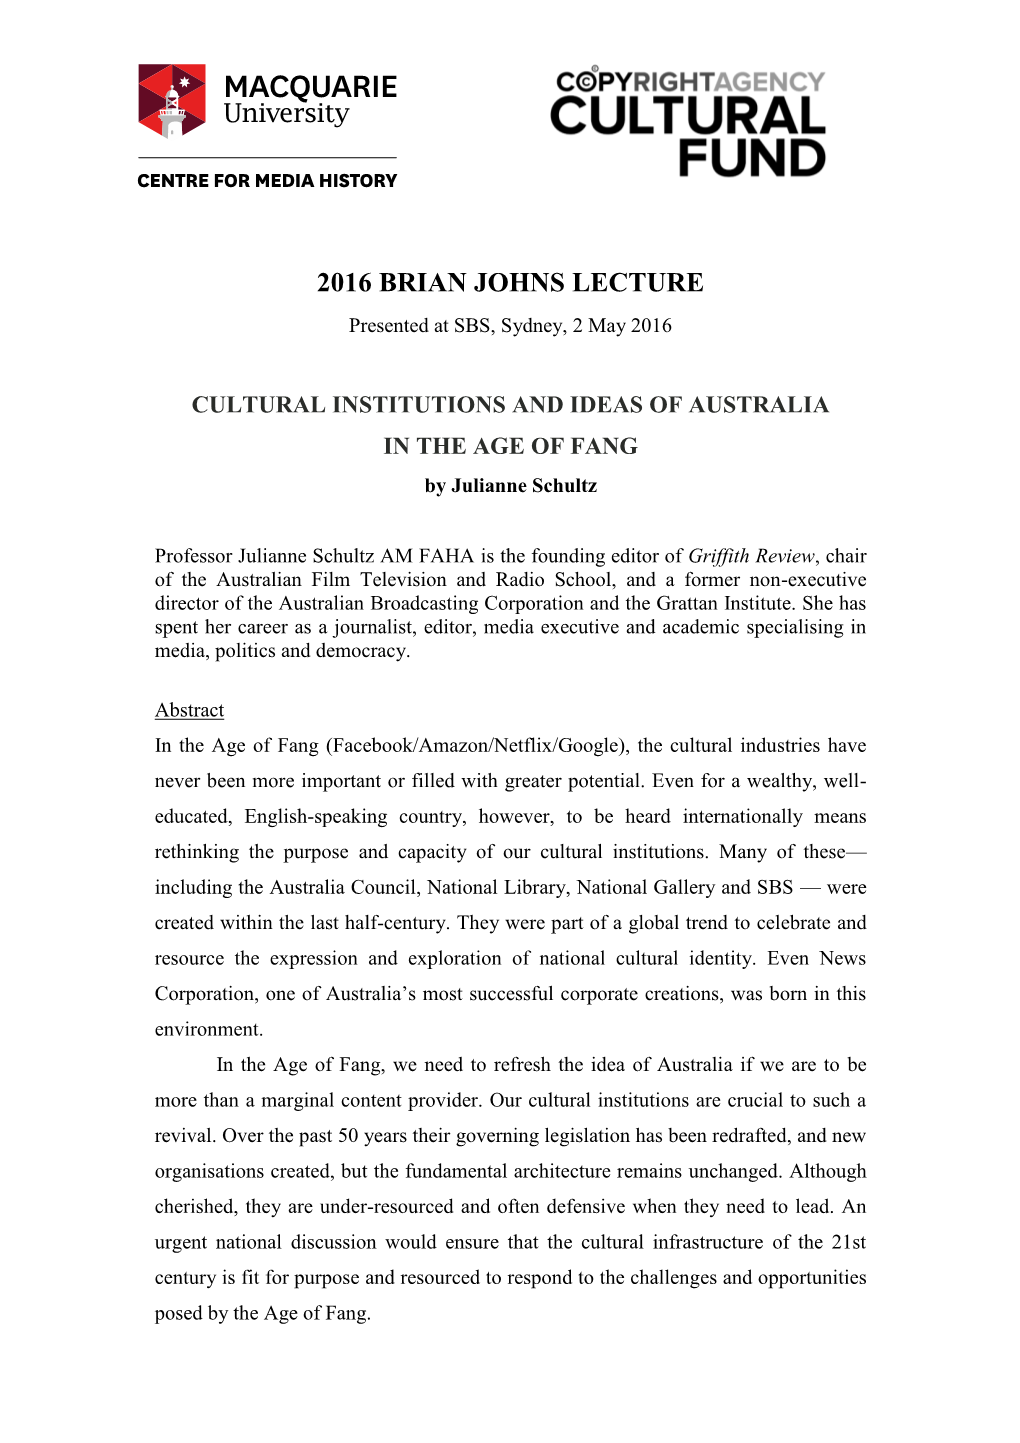 2016 BRIAN JOHNS LECTURE Presented at SBS, Sydney, 2 May 2016